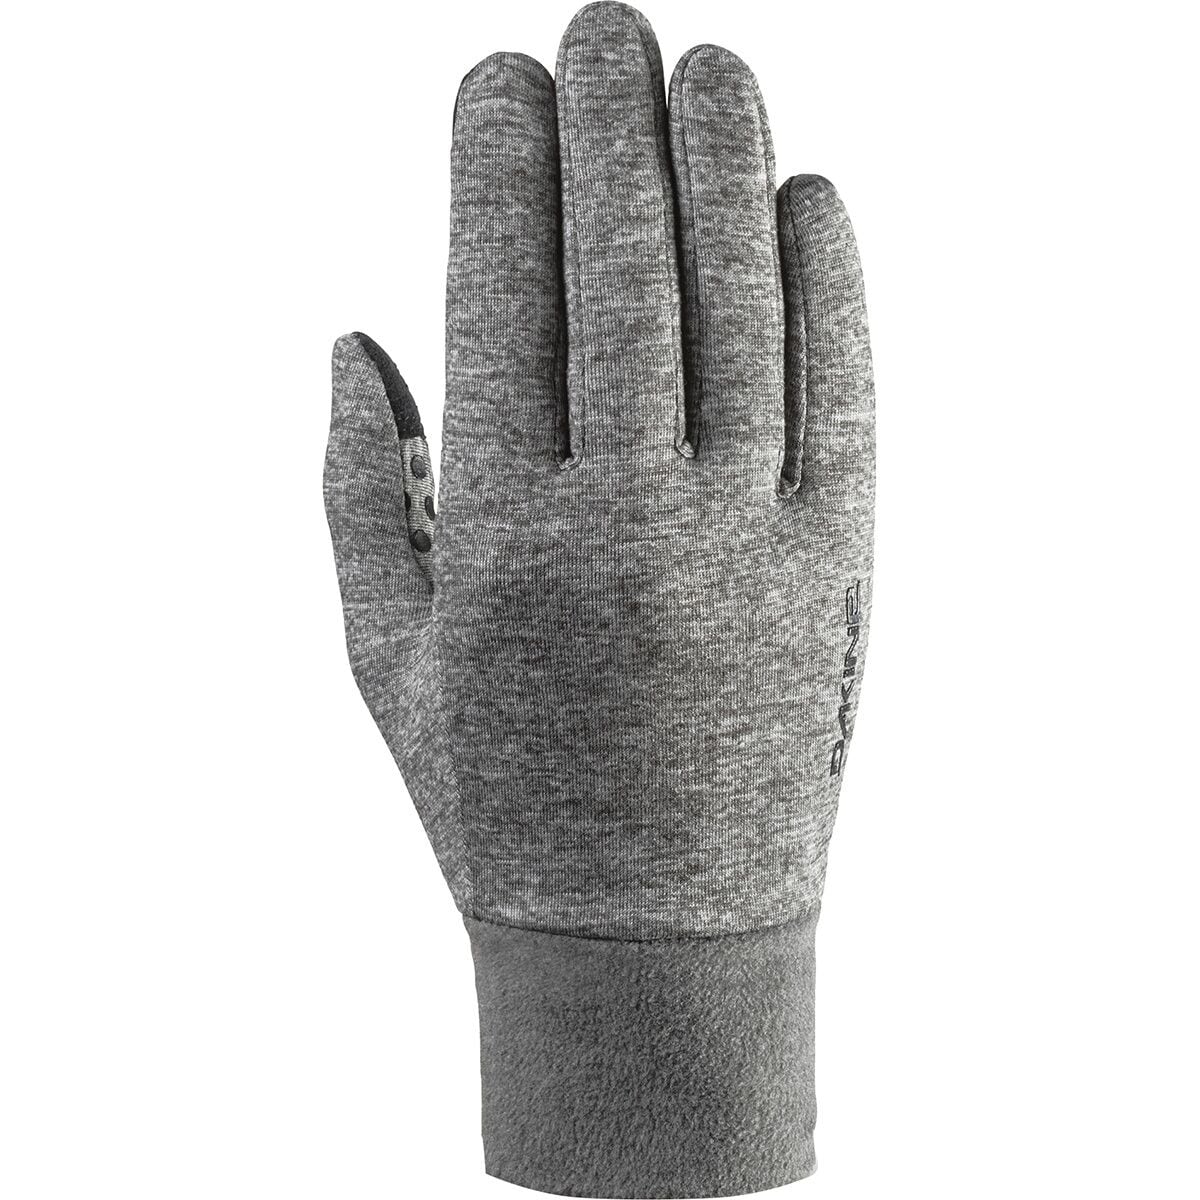 Storm Liner Touch Screen Compatible Glove - Women